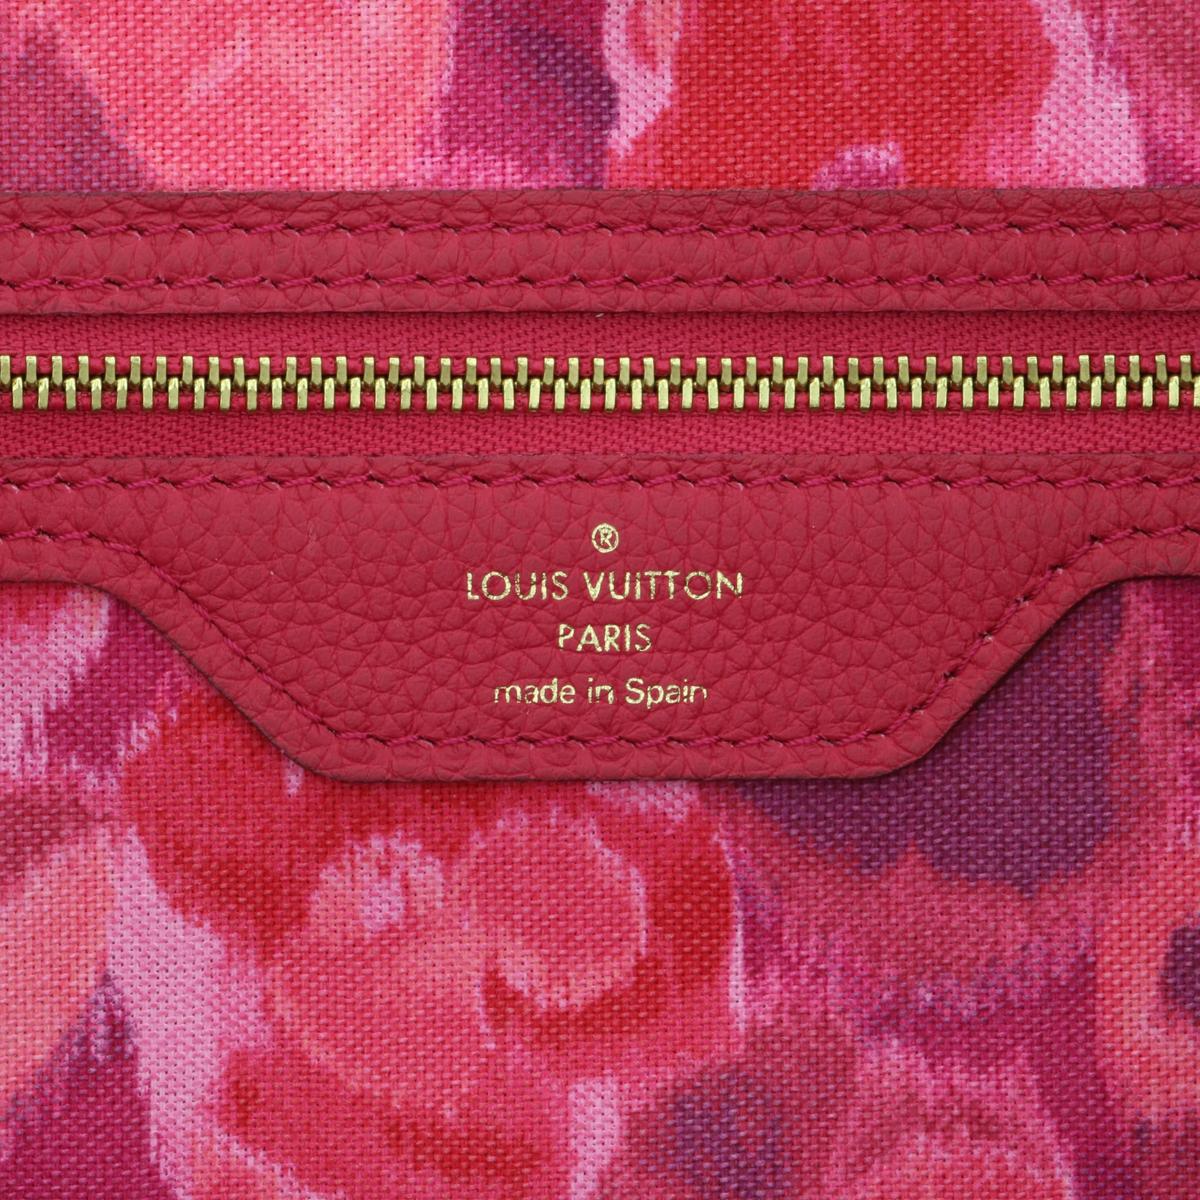 Louis Vuitton Neverfull MM Ikat Bag in Monogram Fuchsia 2013 Limited Edition For Sale 14